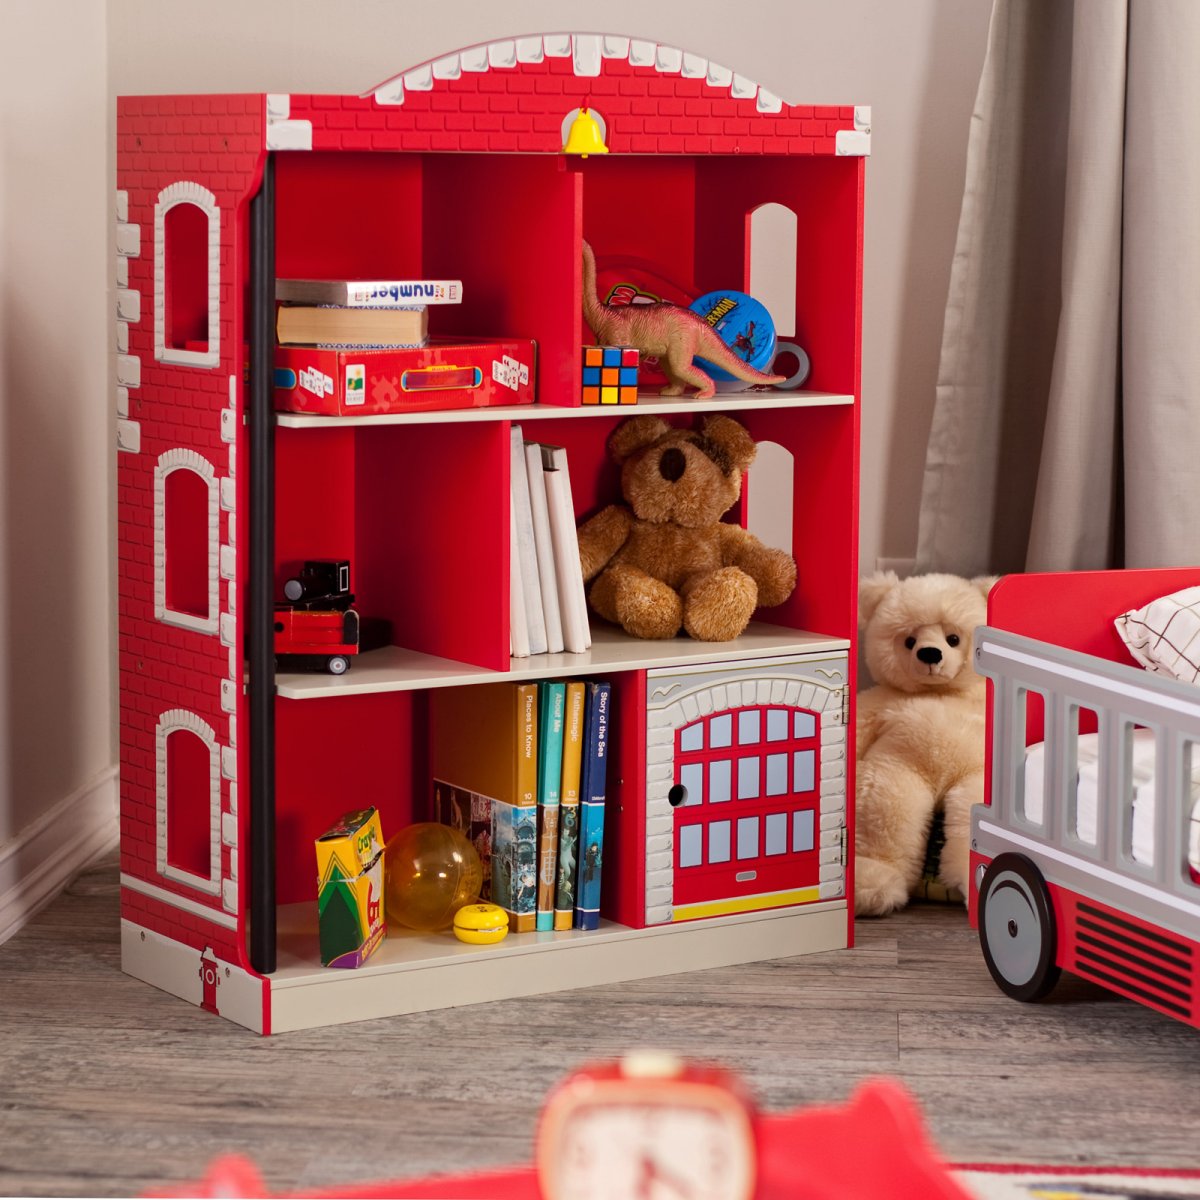 Adorable Dollhouse Bookshelves For Kids To Decorate The Room